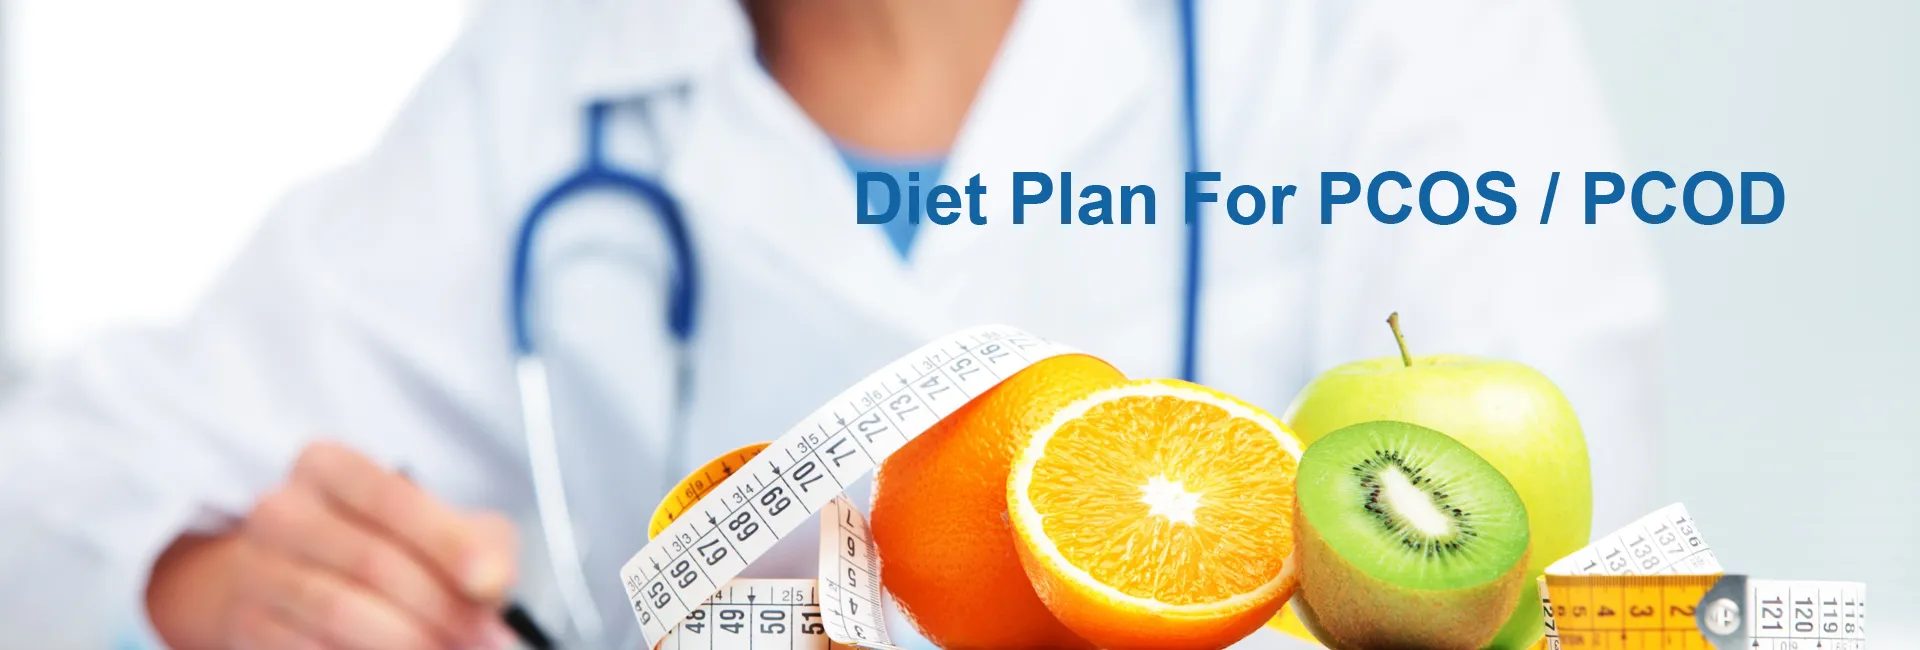 Diet Plan For PCOS / PCOD In Abu Dhabi